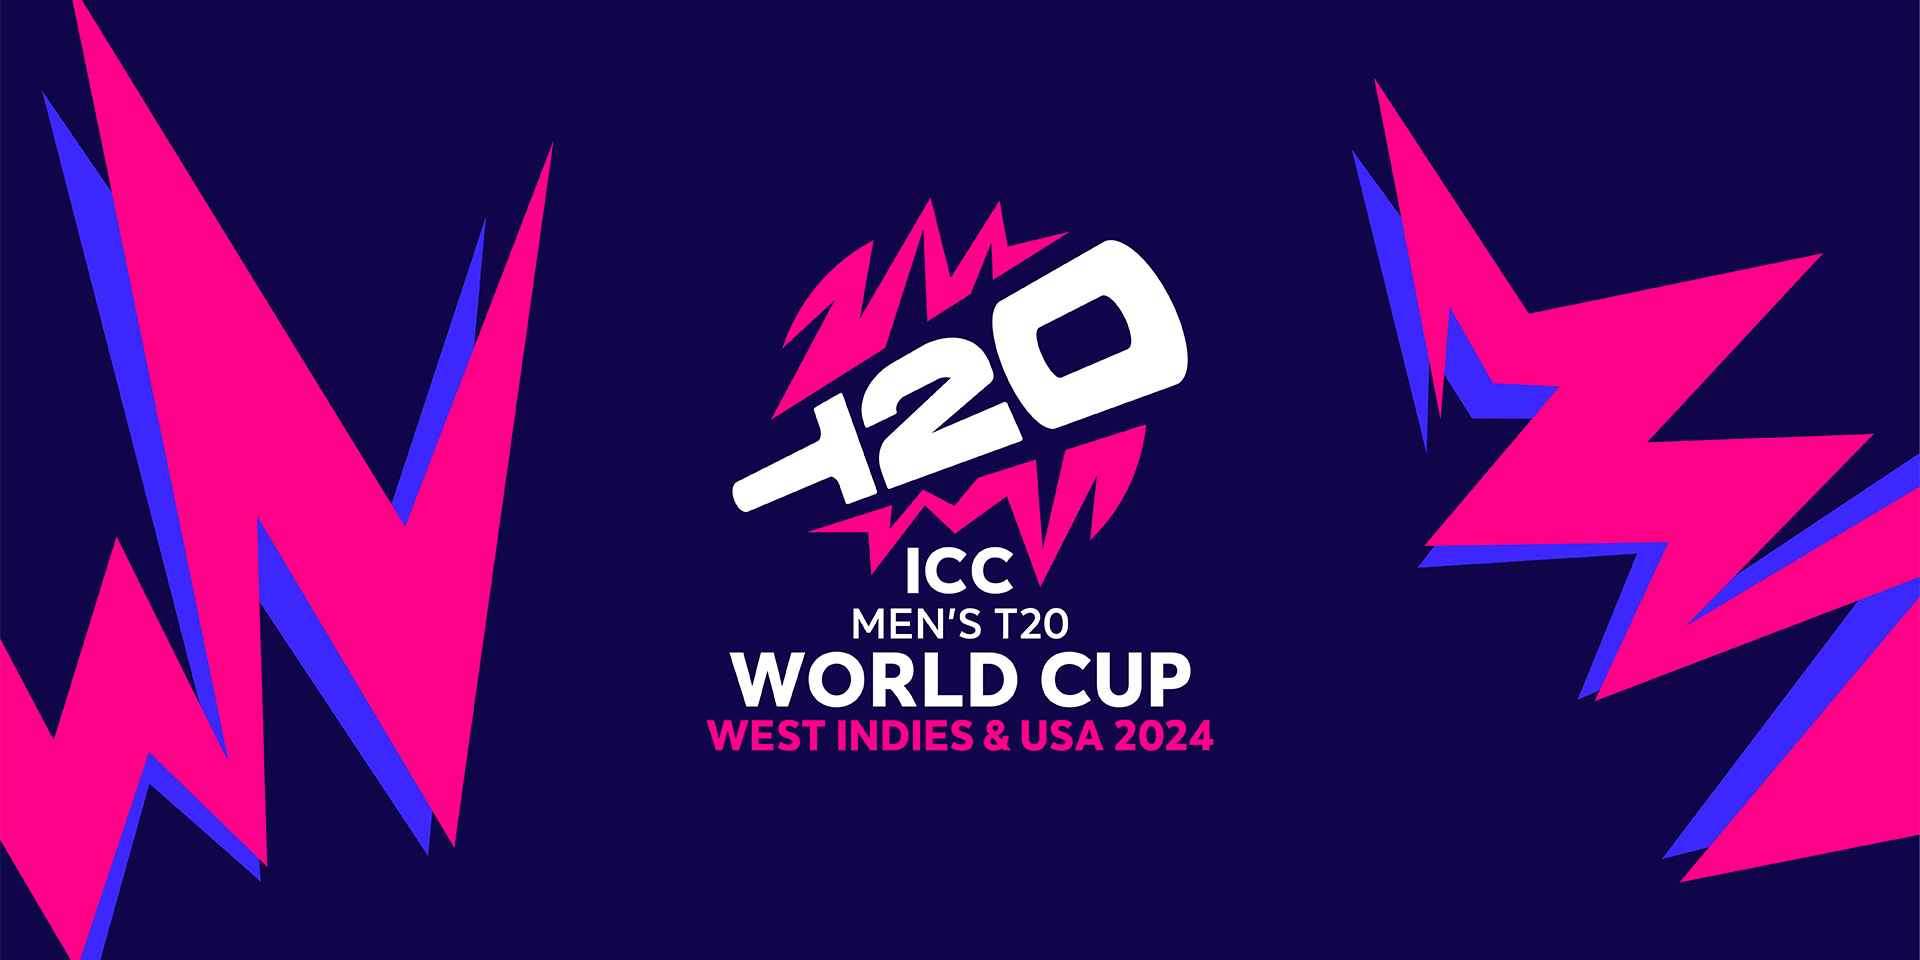 T20 World Cup winner will be richer by $2.45 million